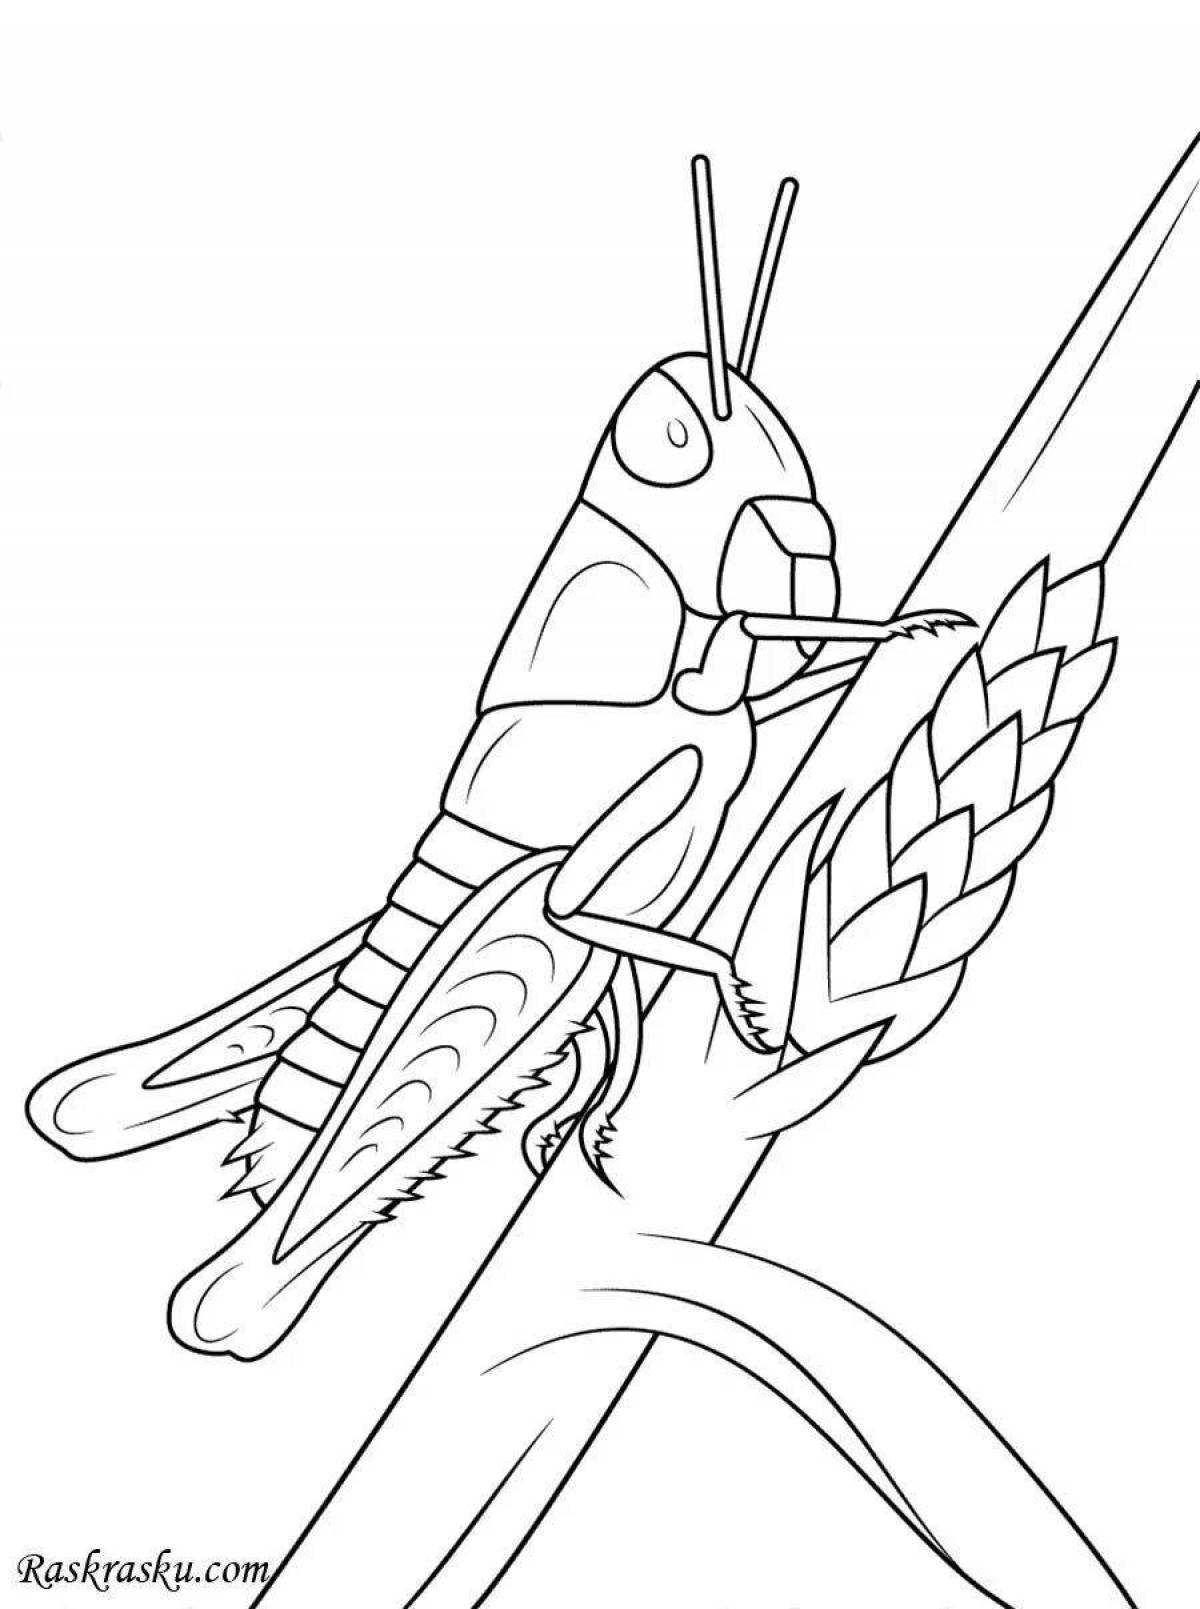 Adorable locust coloring page